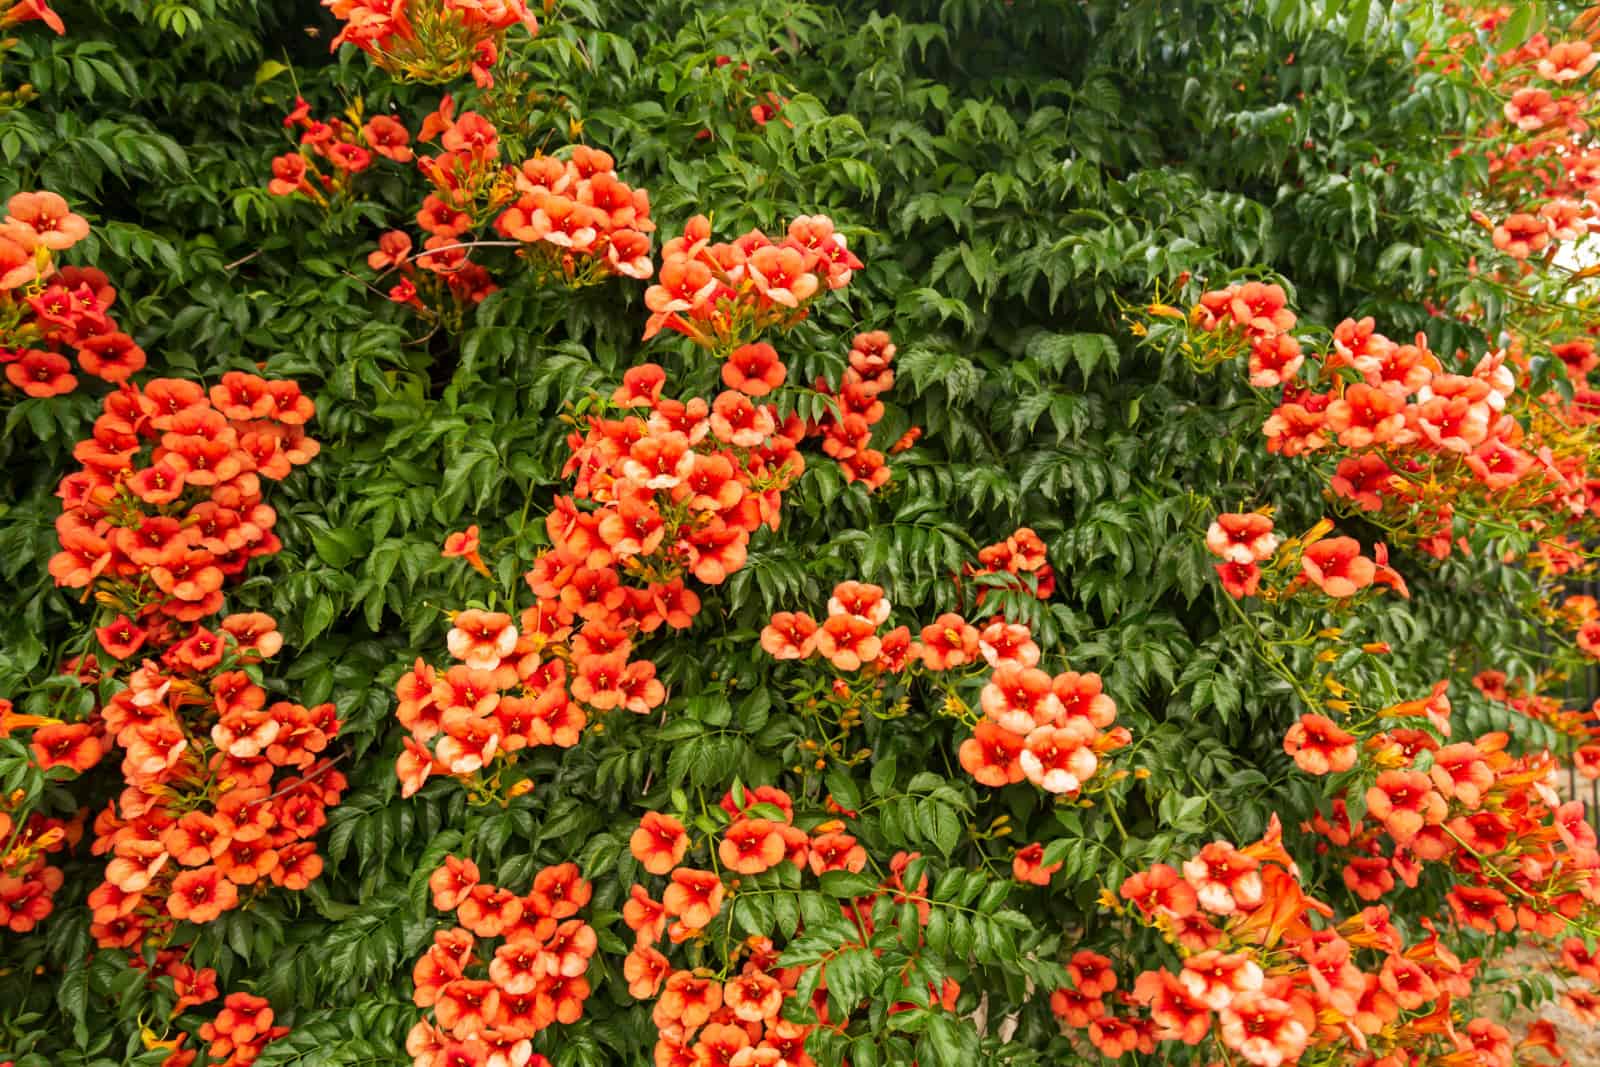 Bright red flowers of the trumpet vine or trumpet creeper - Campsis radicans.